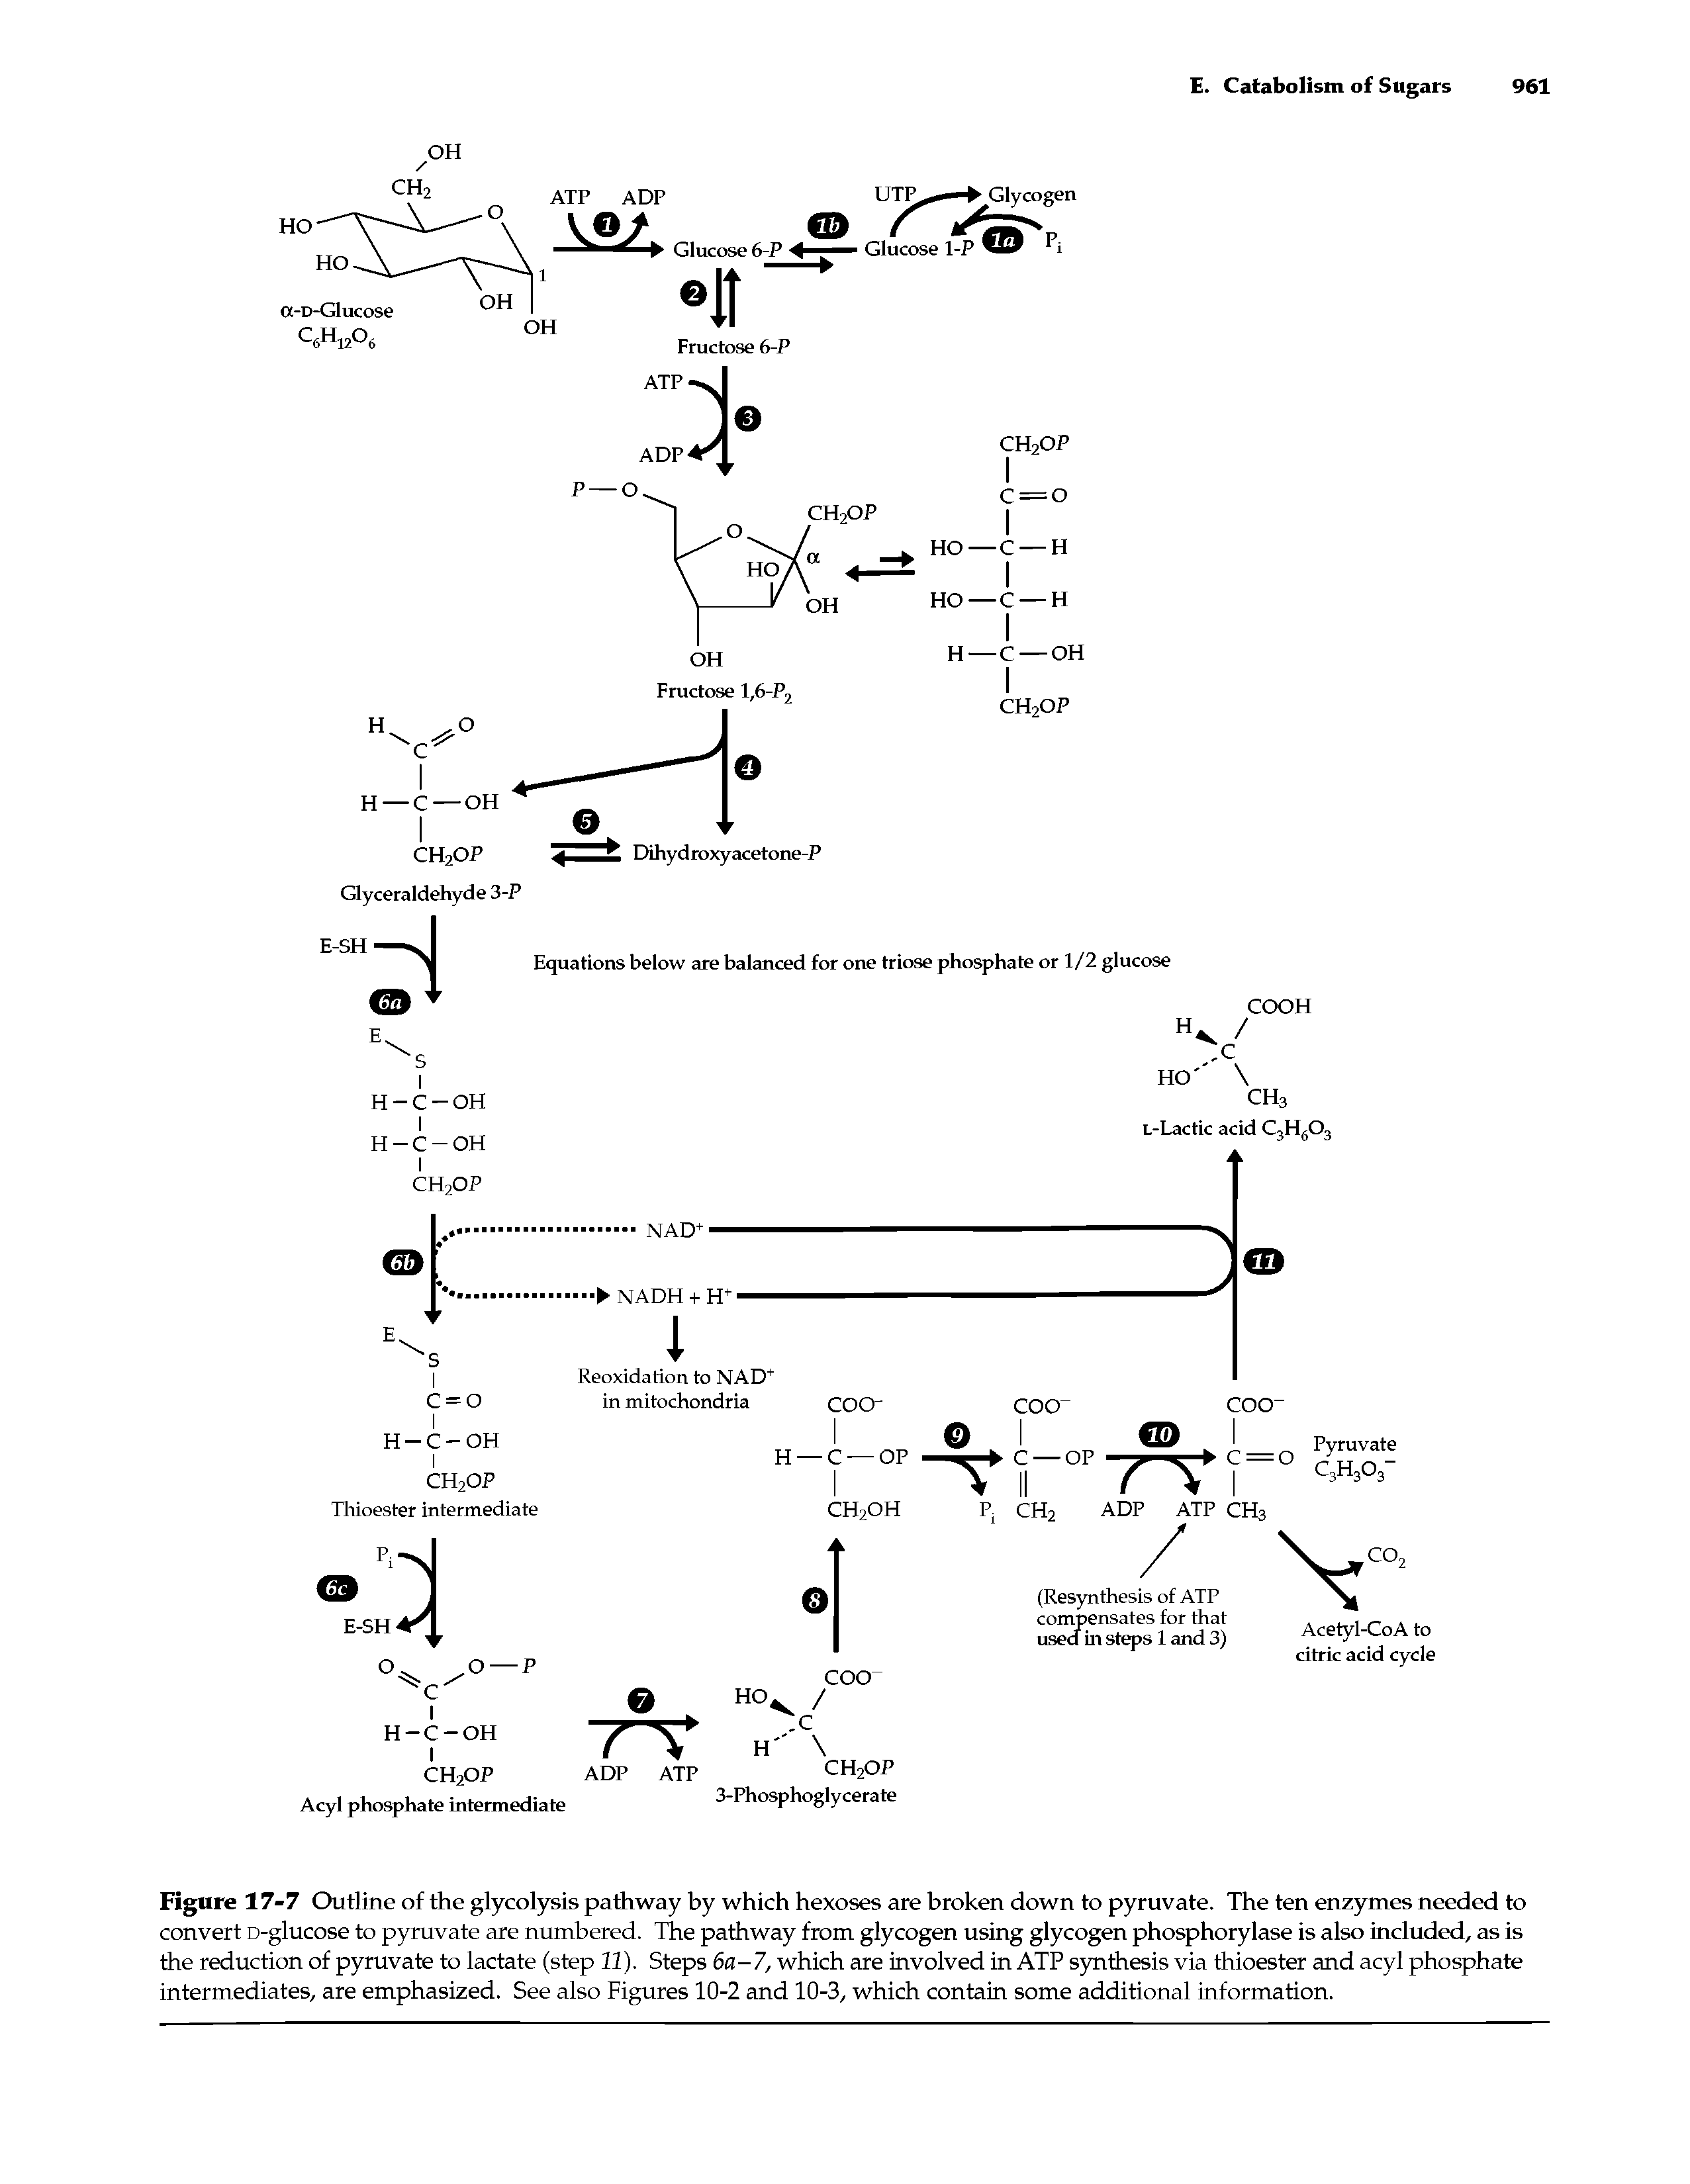 Figure 17-7 Outline of the glycolysis pathway by which hexoses are broken down to pyruvate. The ten enzymes needed to convert D-glucose to pyruvate are numbered. The pathway from glycogen using glycogen phosphorylase is also included, as is the reduction of pyruvate to lactate (step 11). Steps 6a-7, which are involved in ATP synthesis via thioester and acyl phosphate intermediates, are emphasized. See also Figures 10-2 and 10-3, which contain some additional information.